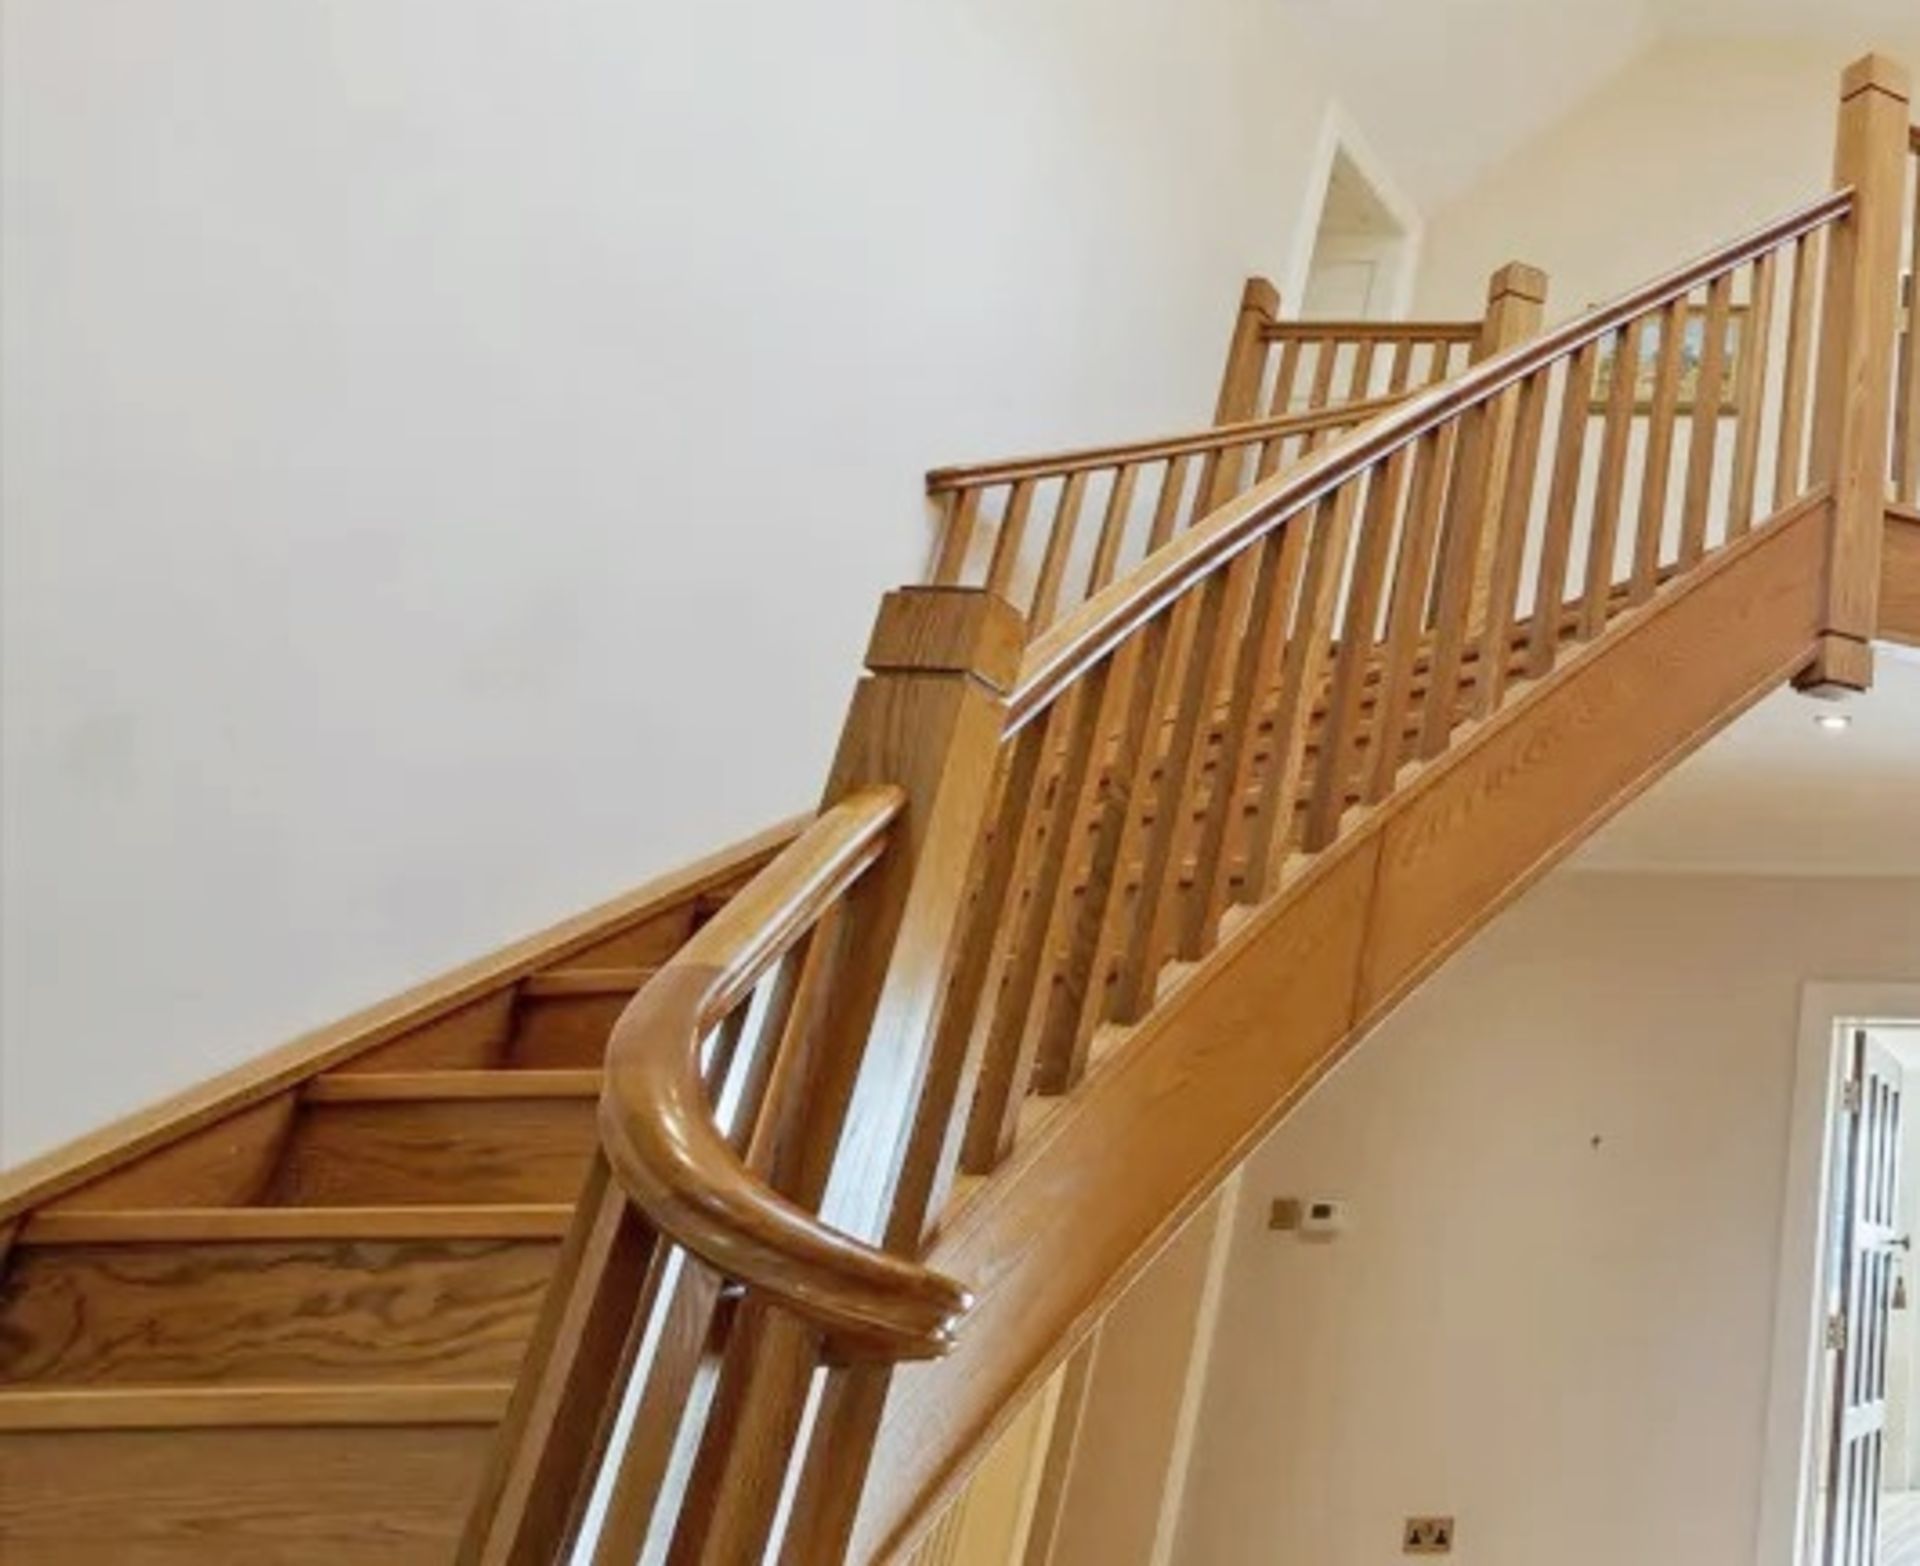 1 x Bespoke Stately 13-Step Curved Wooden Staircase - Image 5 of 5